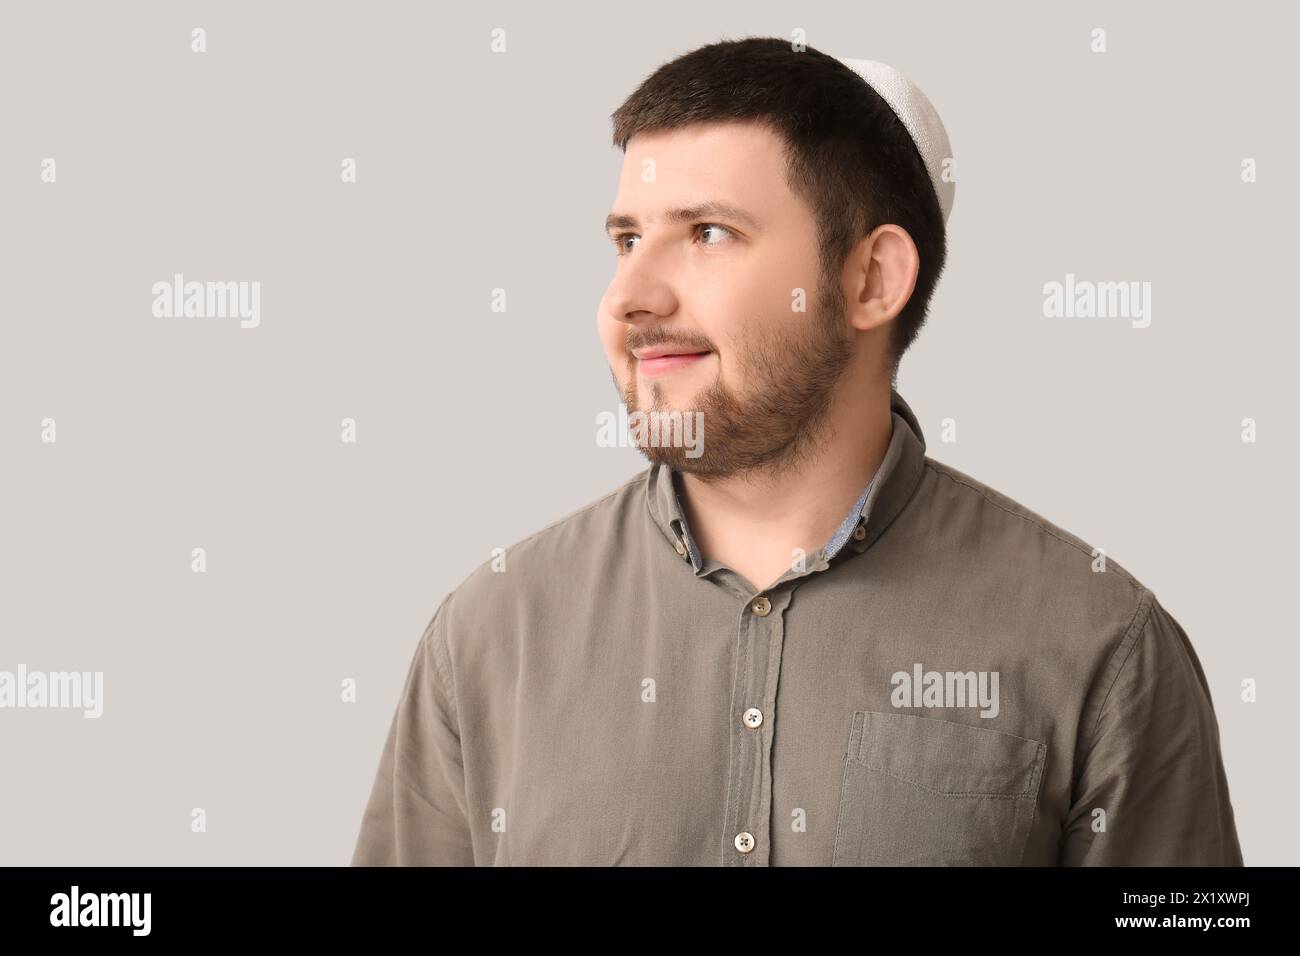 Young Jewish man in hat on light background Stock Photo